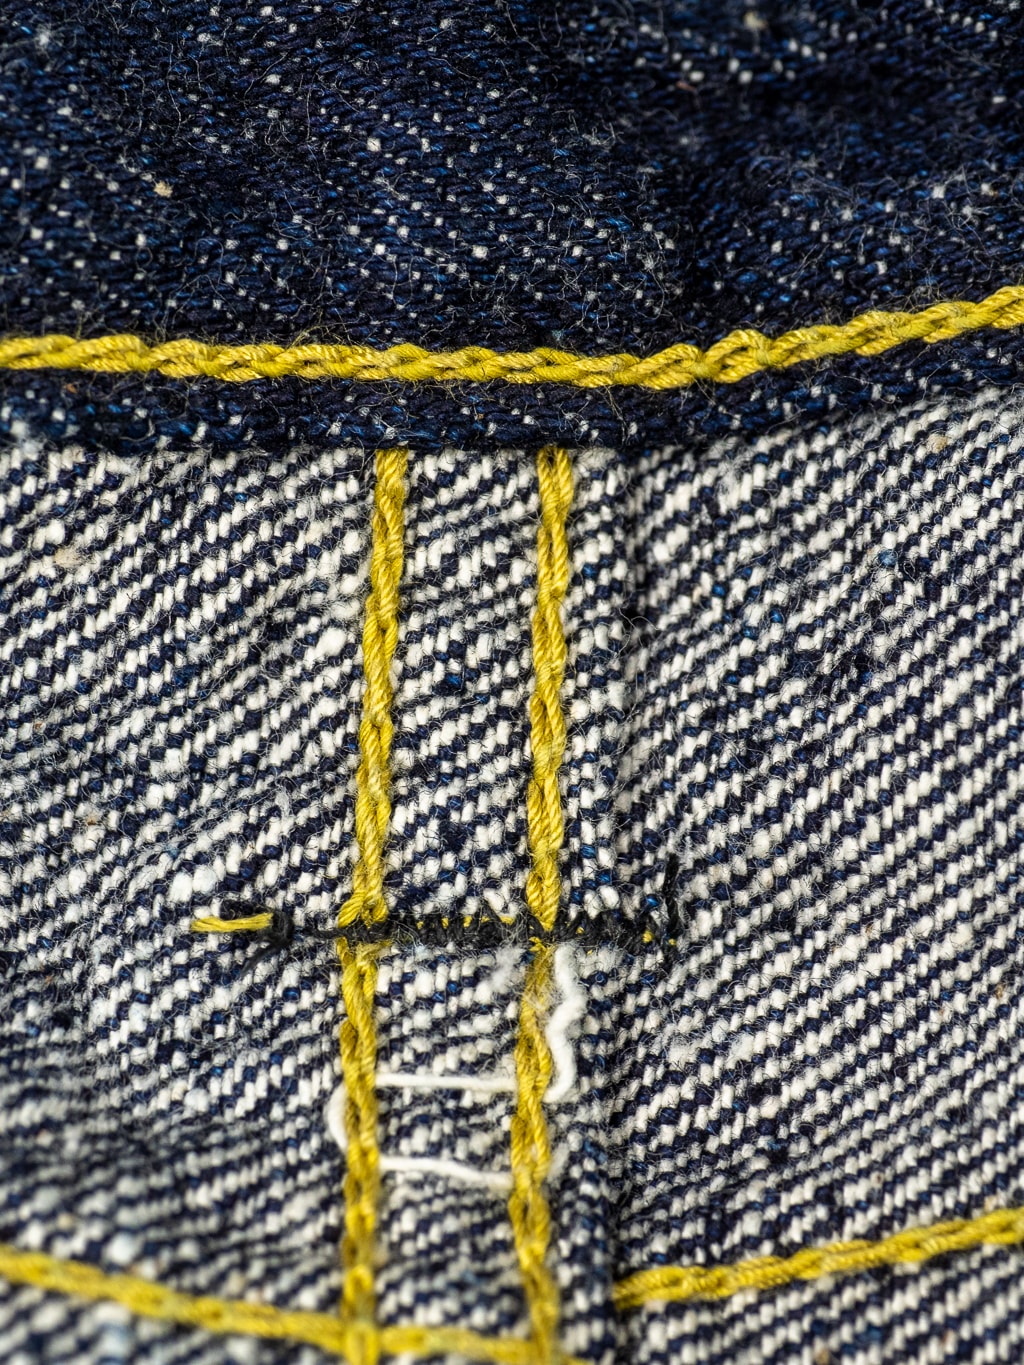 The Strike Gold Keep Earth Natural Indigo Jeans stitching detail